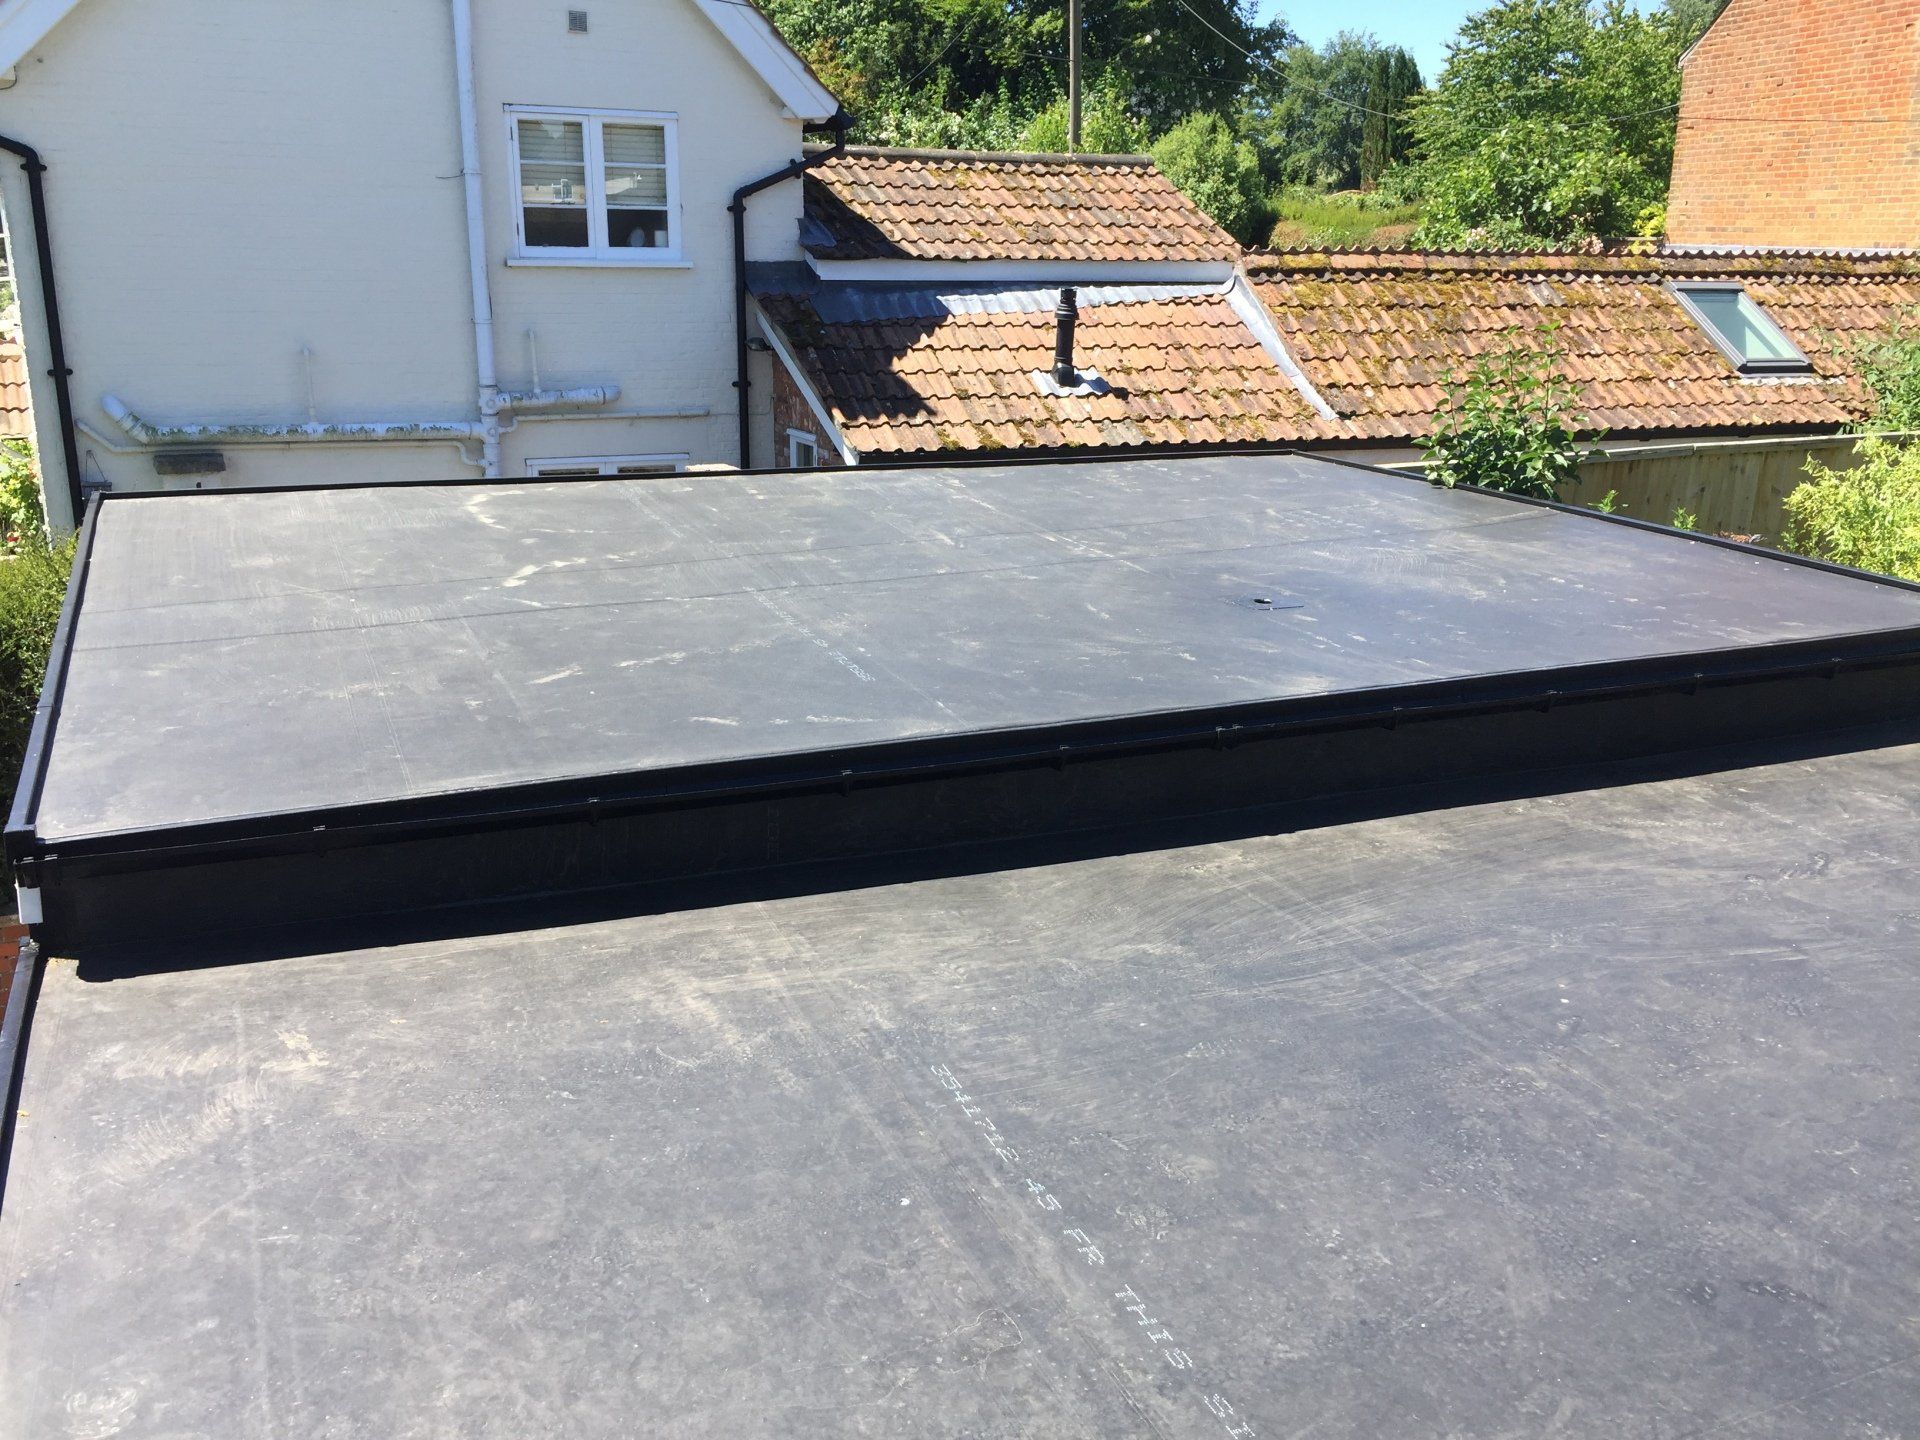 2 old garage flat roofs side by side